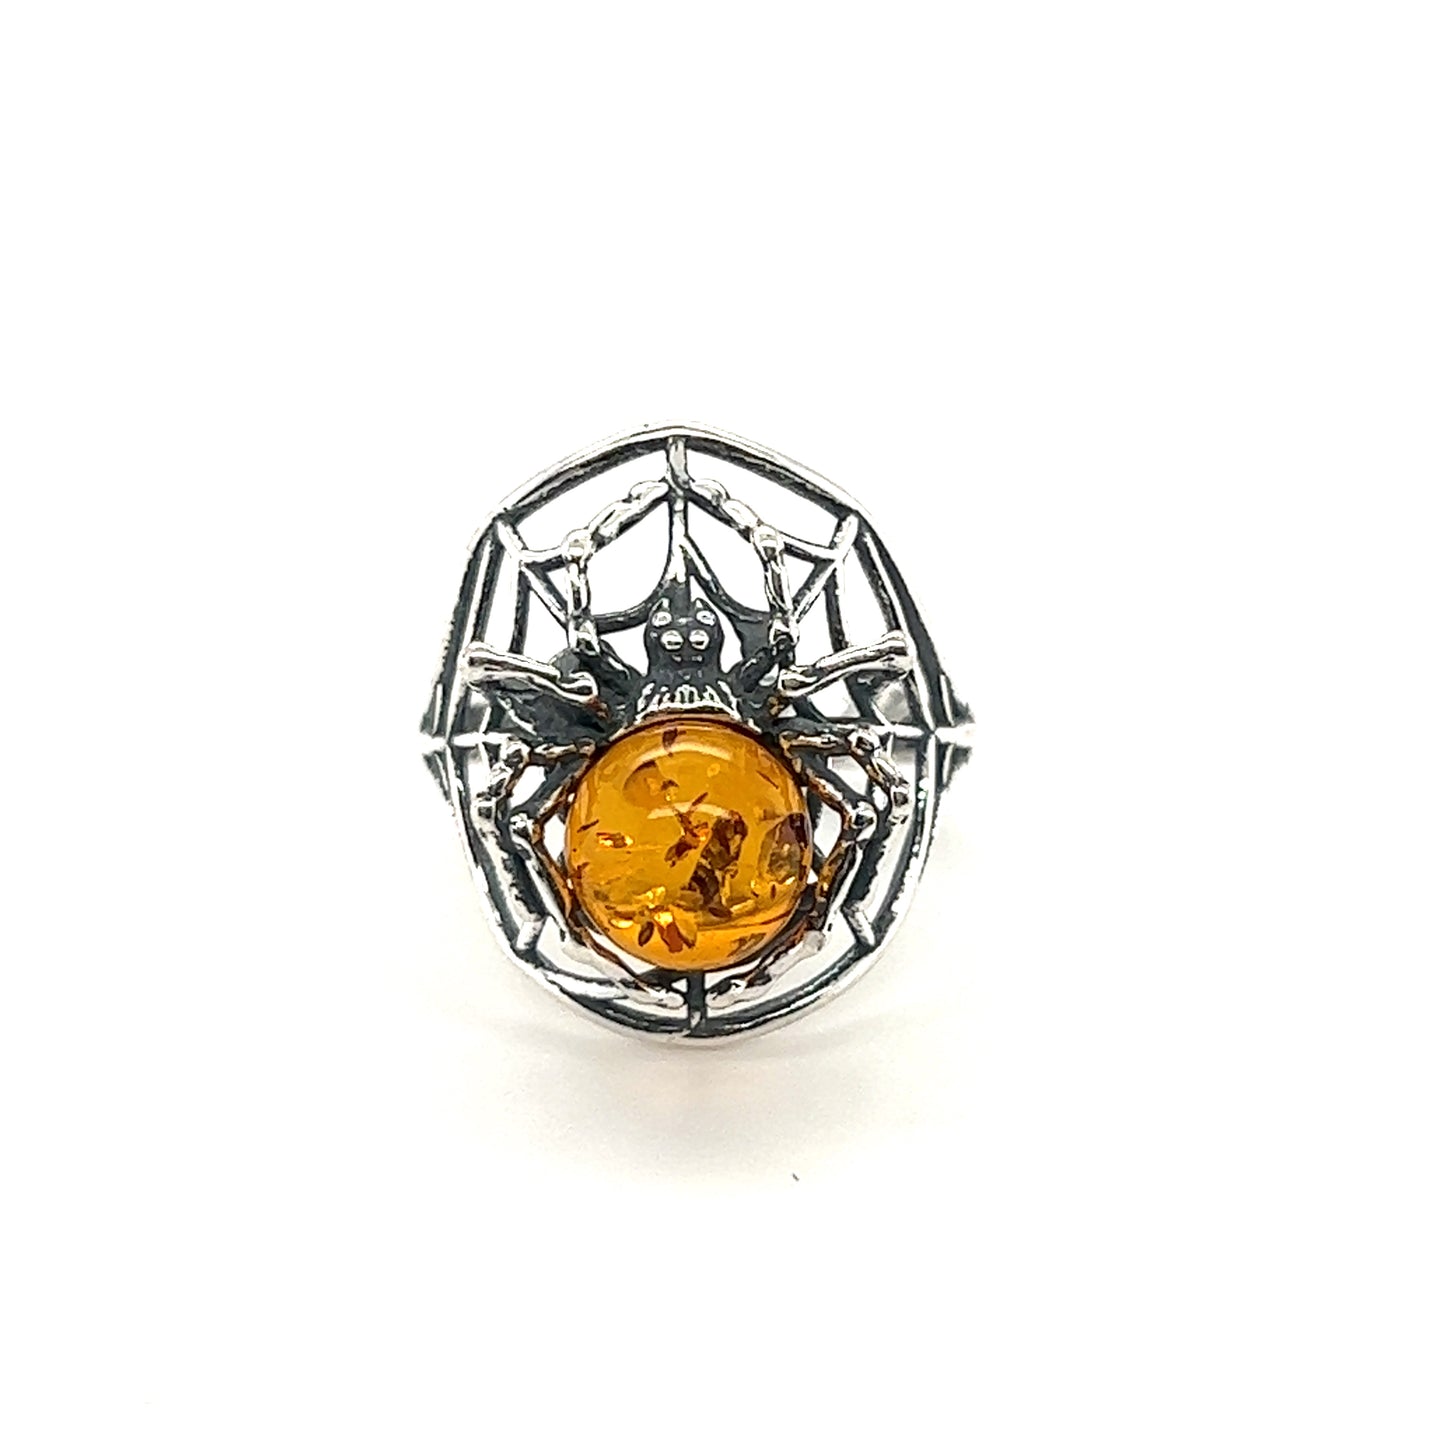 A Super Silver Entrancing Baltic Amber Spider Ring, radiating centering energy.